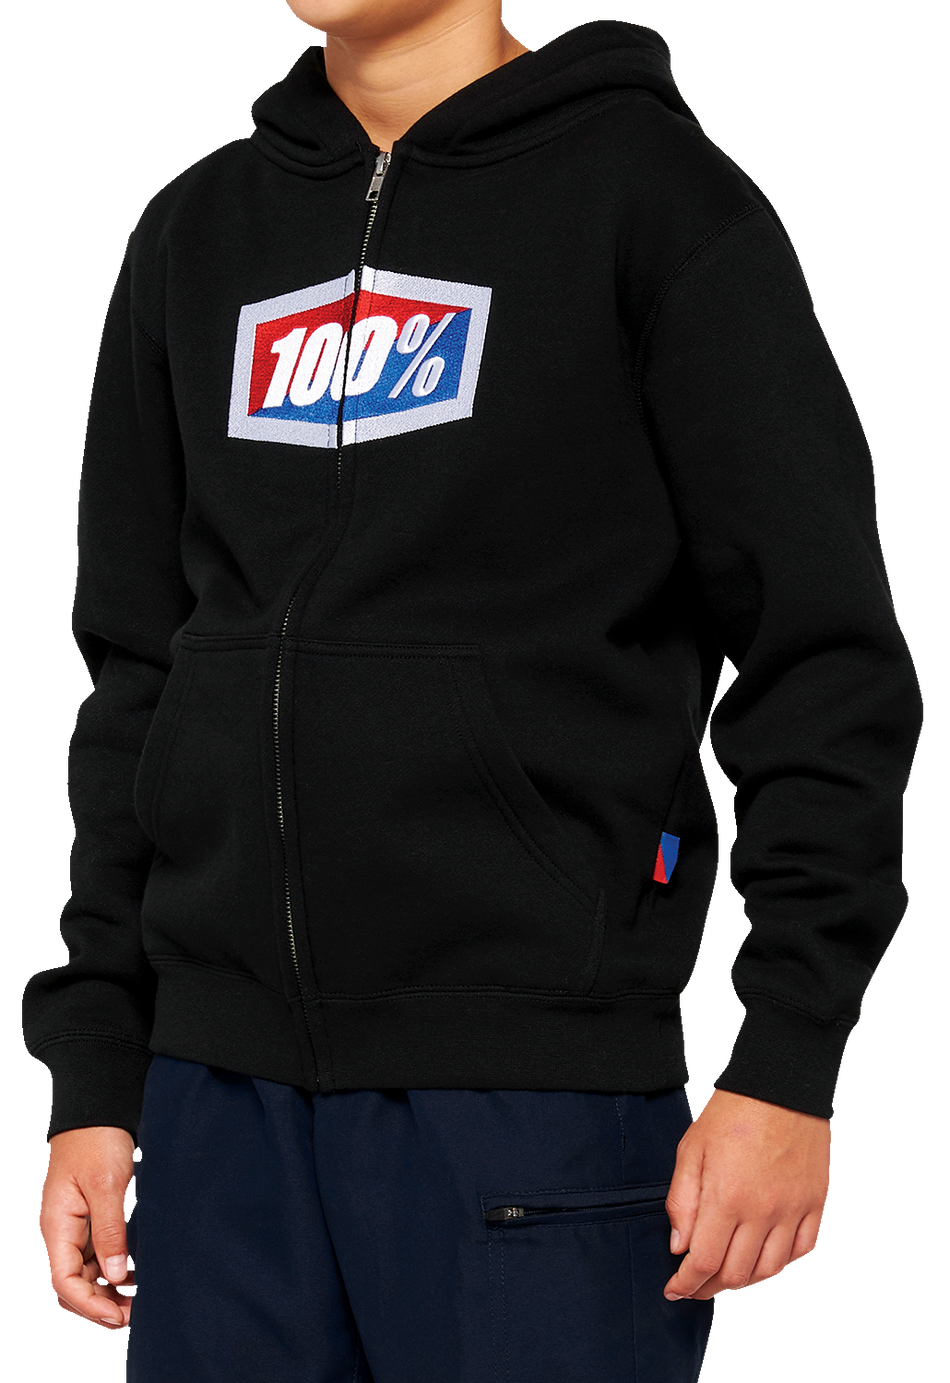 100% Youth Official Zip Hoodie - Black - Small 20033-00000